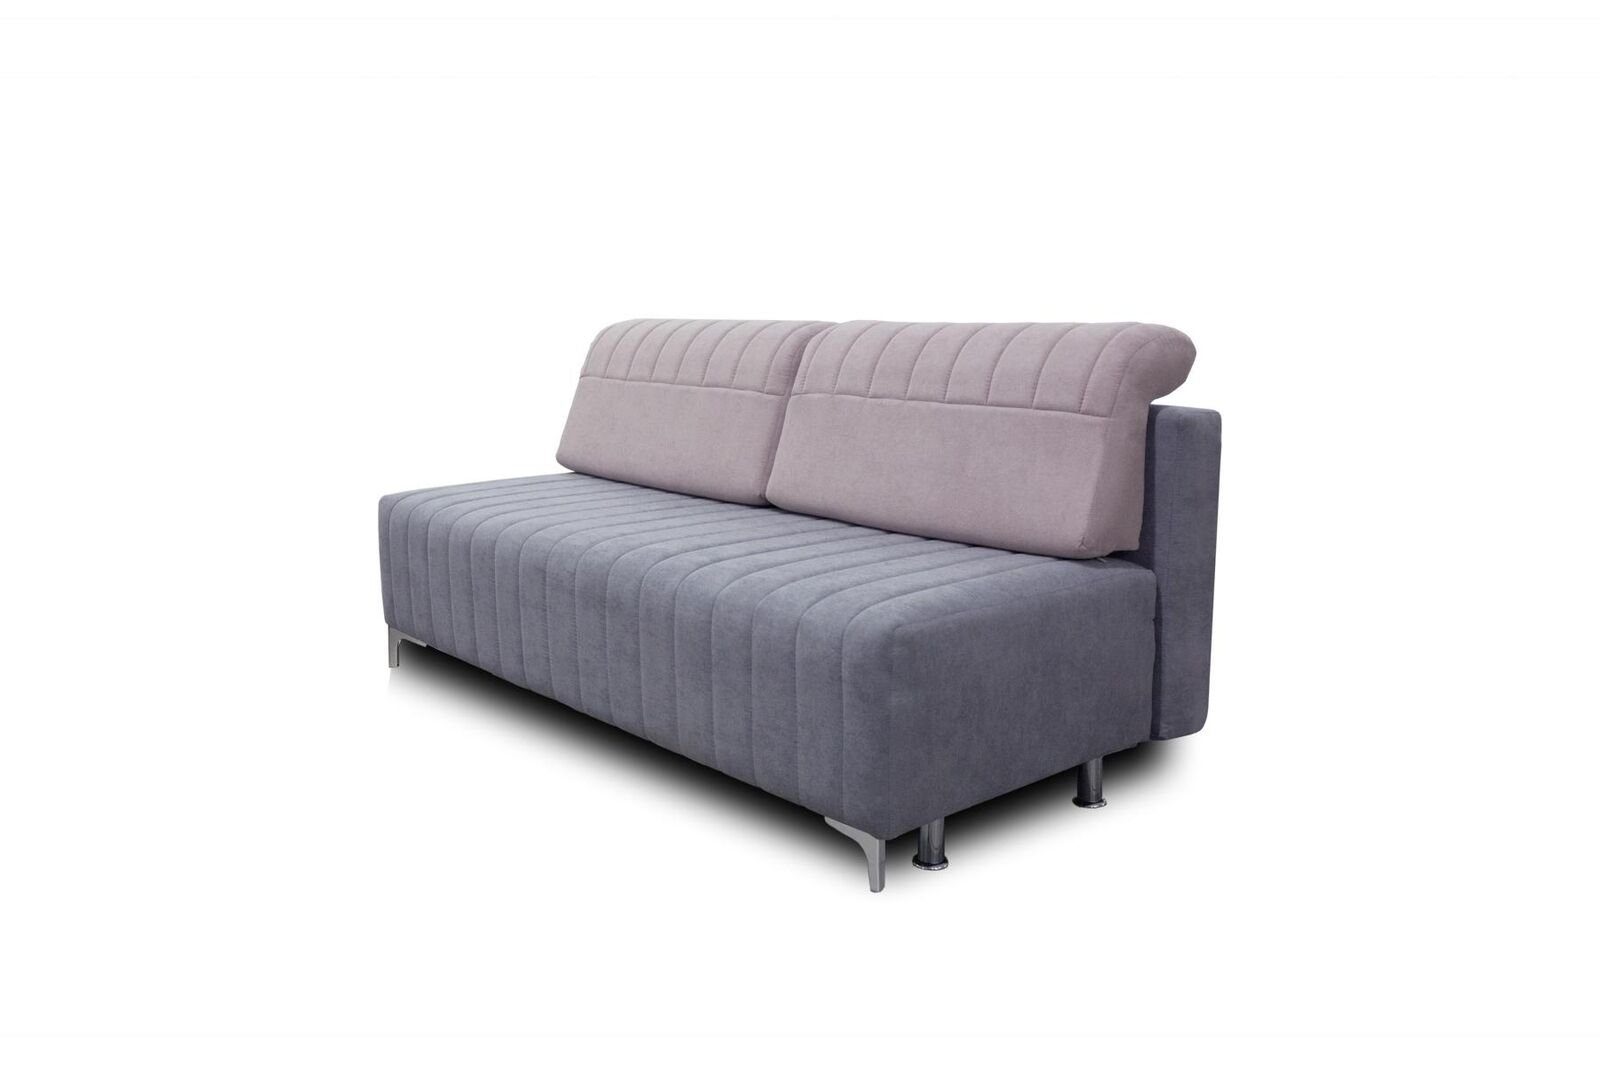 JVmoebel Sofa 2 Lounge Sofa in Sofa, Sitzer Made Polster Design Europe Stoff Couch